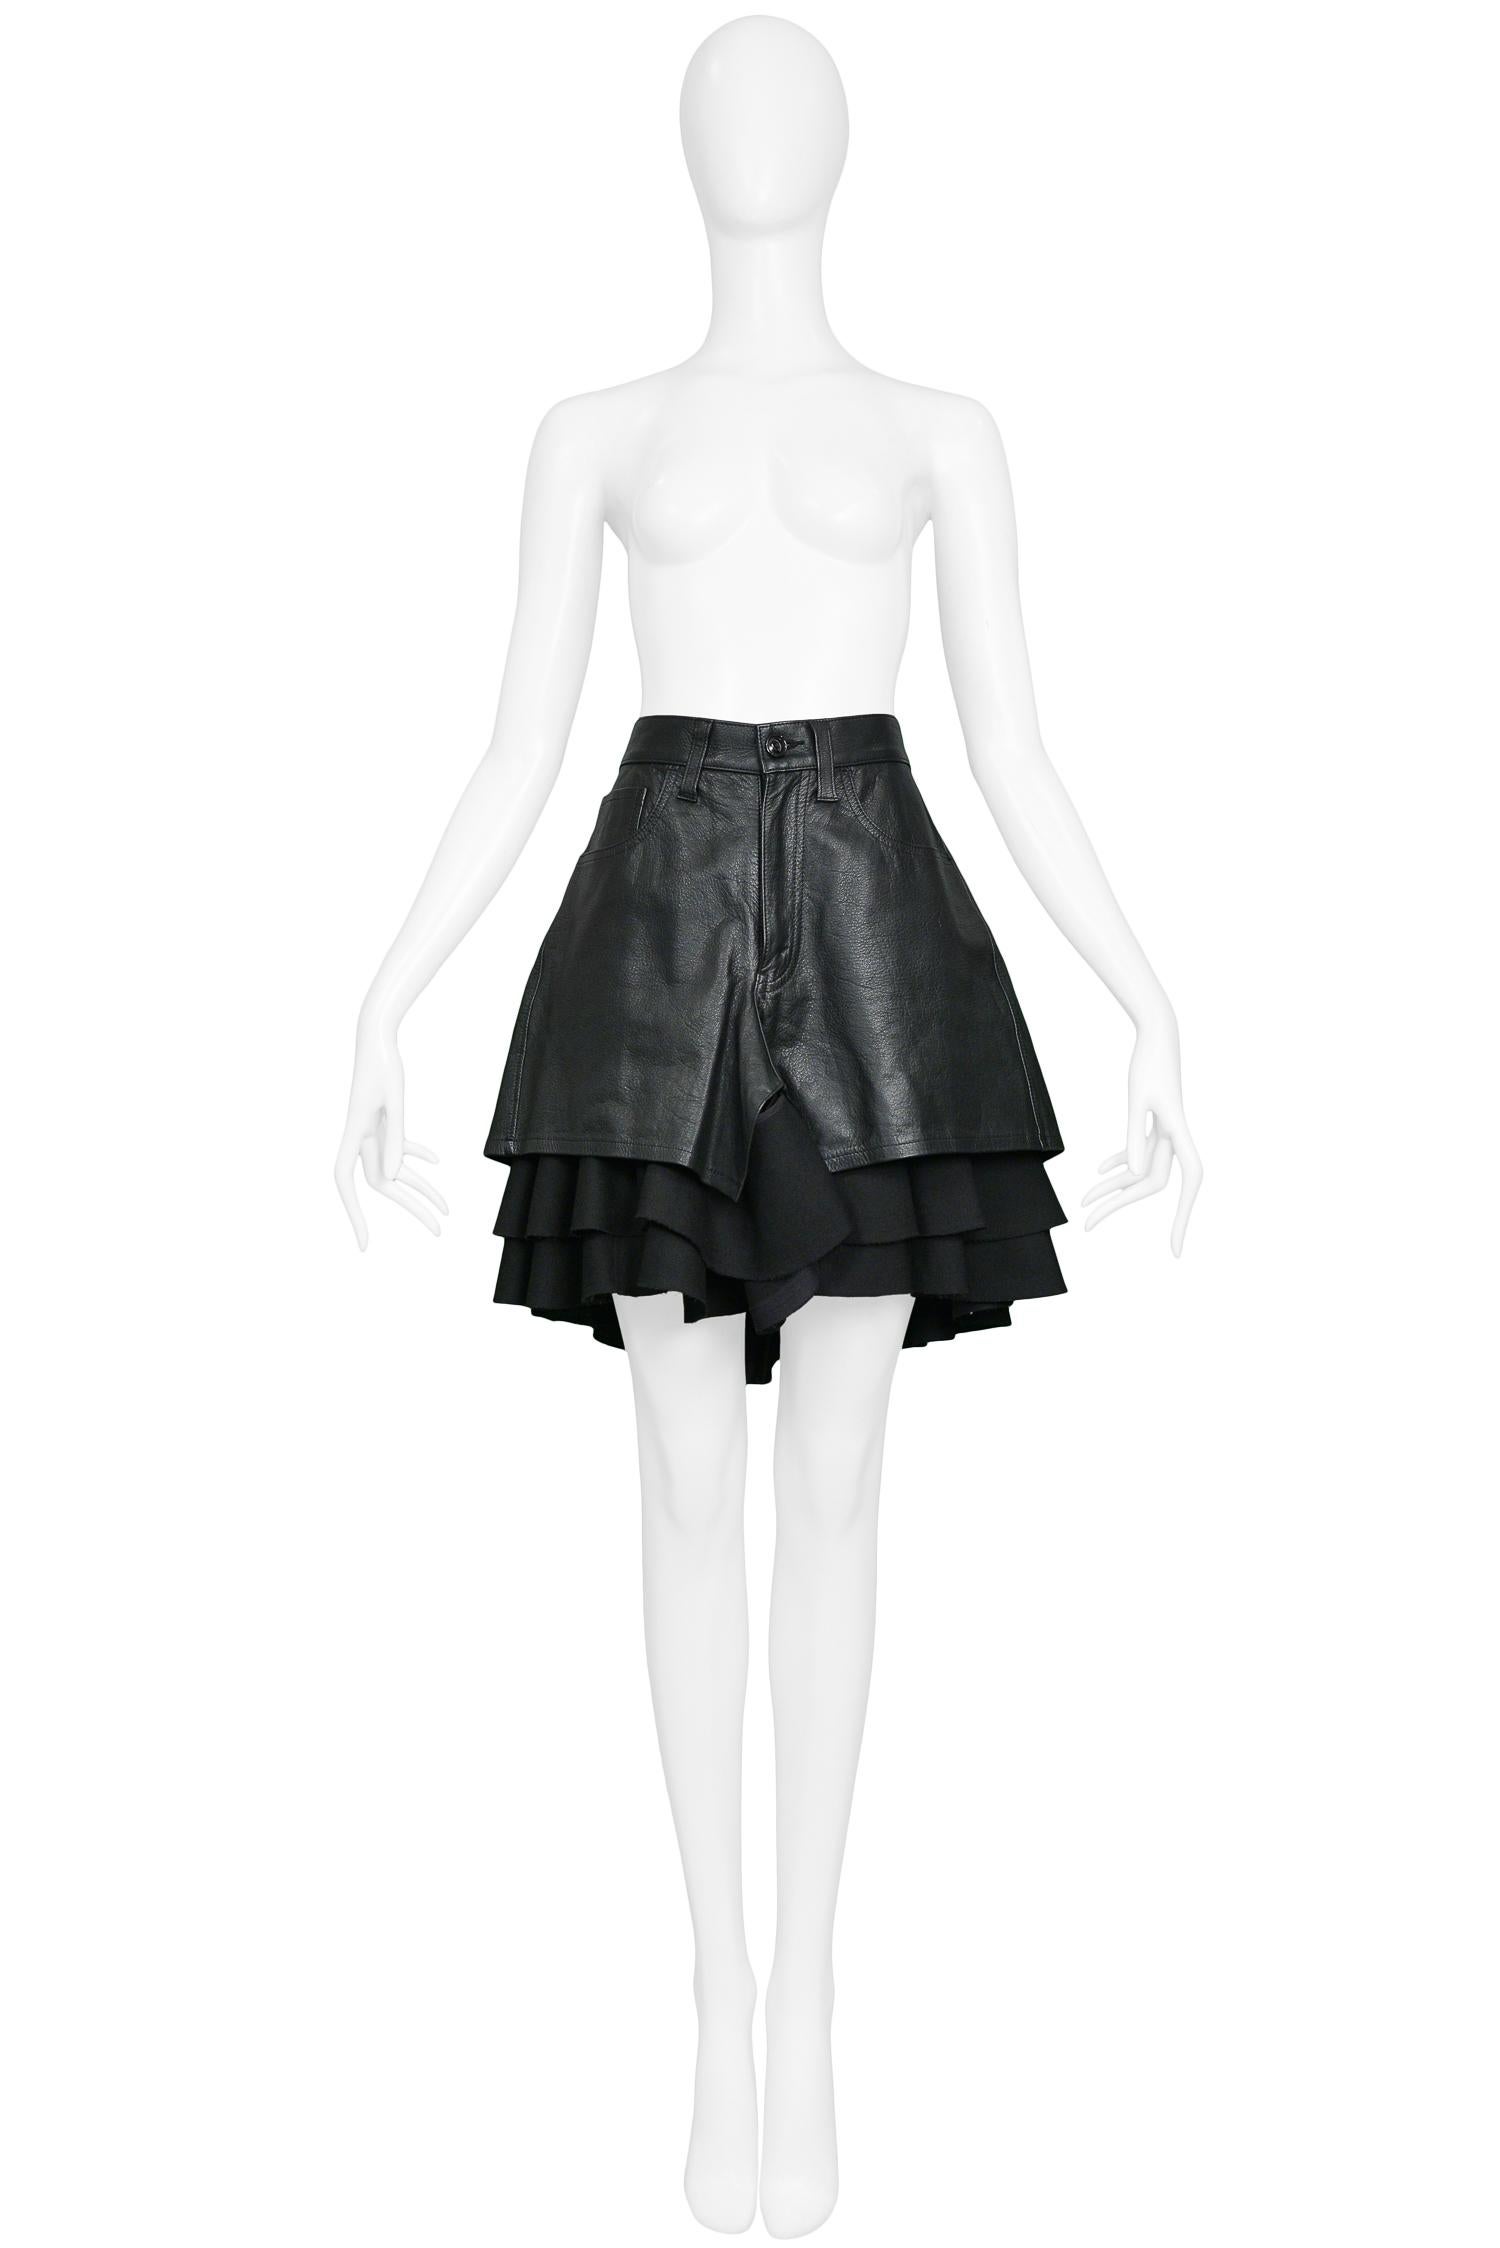 Vintage Junya Watanabe black leather shorts with tiered wool ruffle underlay. 

Excellent Condition.

Size: Medium